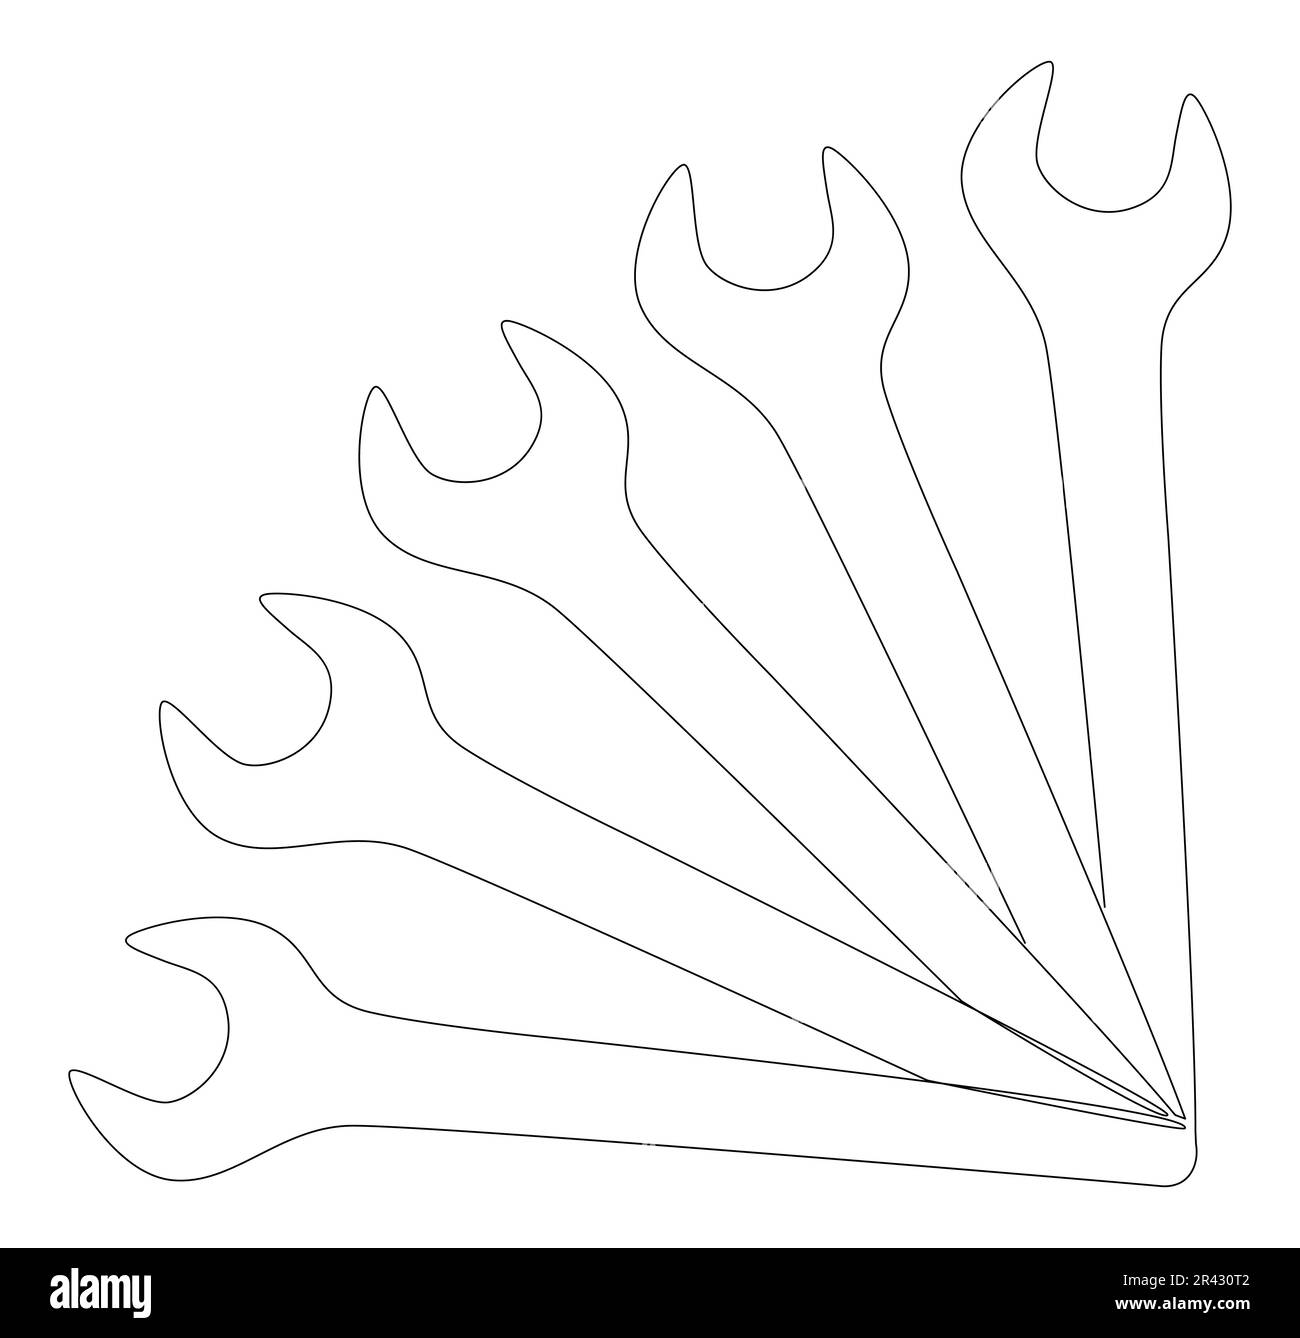 https://c8.alamy.com/comp/2R430T2/one-continuous-line-of-wrench-thin-line-illustration-vector-work-tool-concept-contour-drawing-creative-ideas-2R430T2.jpg